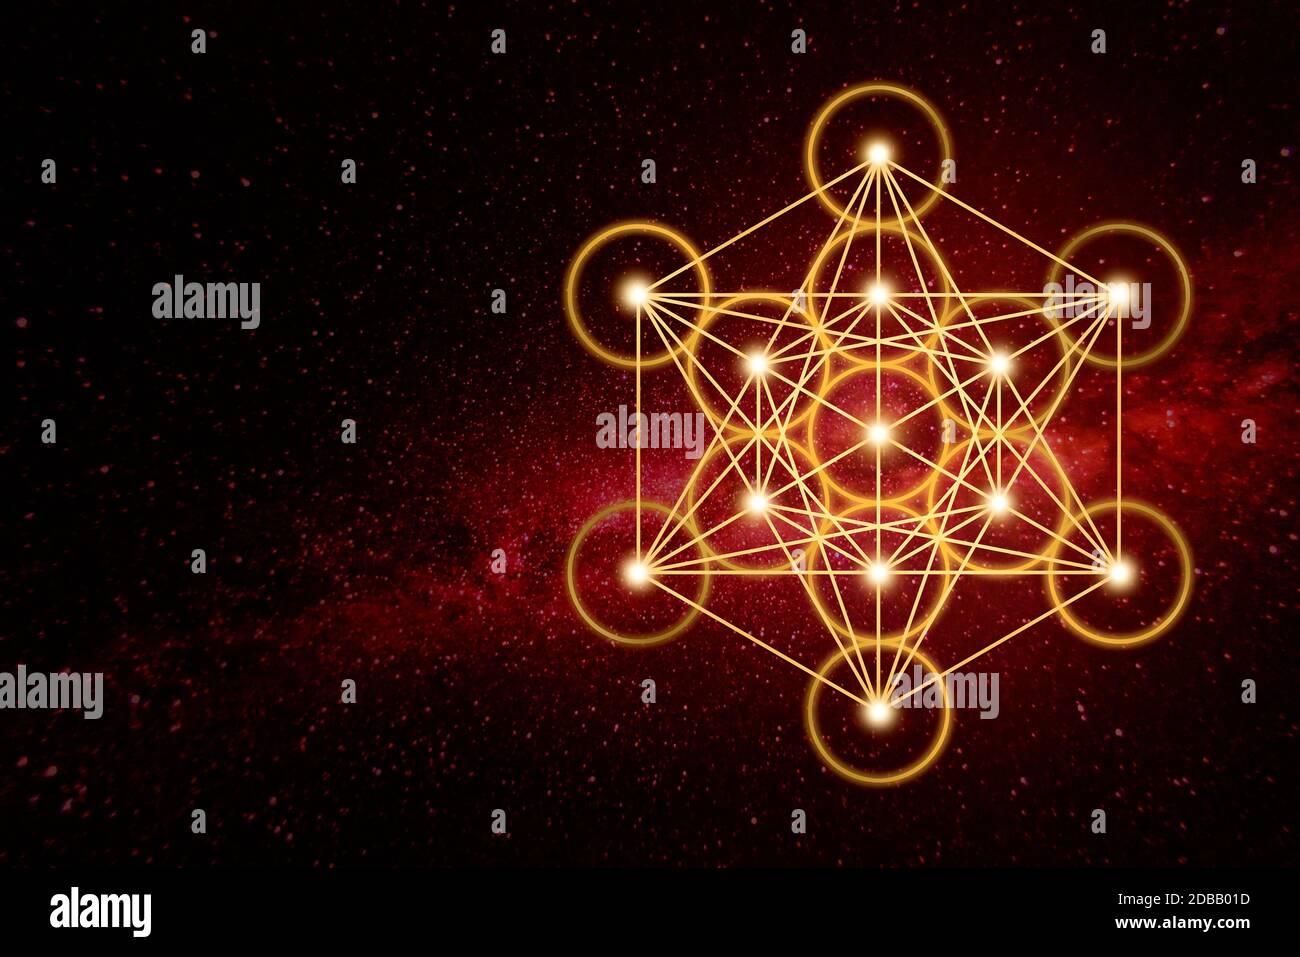 Metatron Cube against abstract background Stock Photo